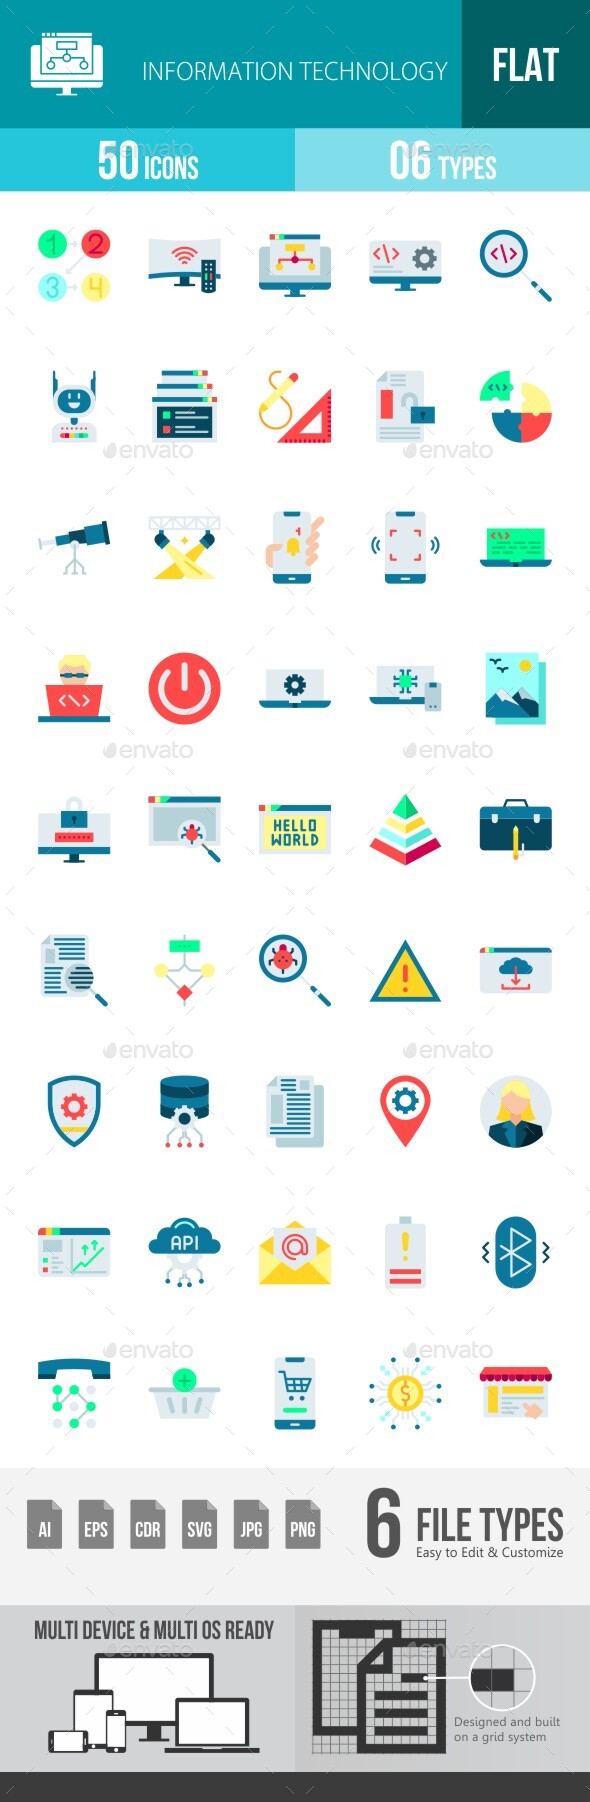 [DOWNLOAD]Information Technology Flat Multicolor Icons